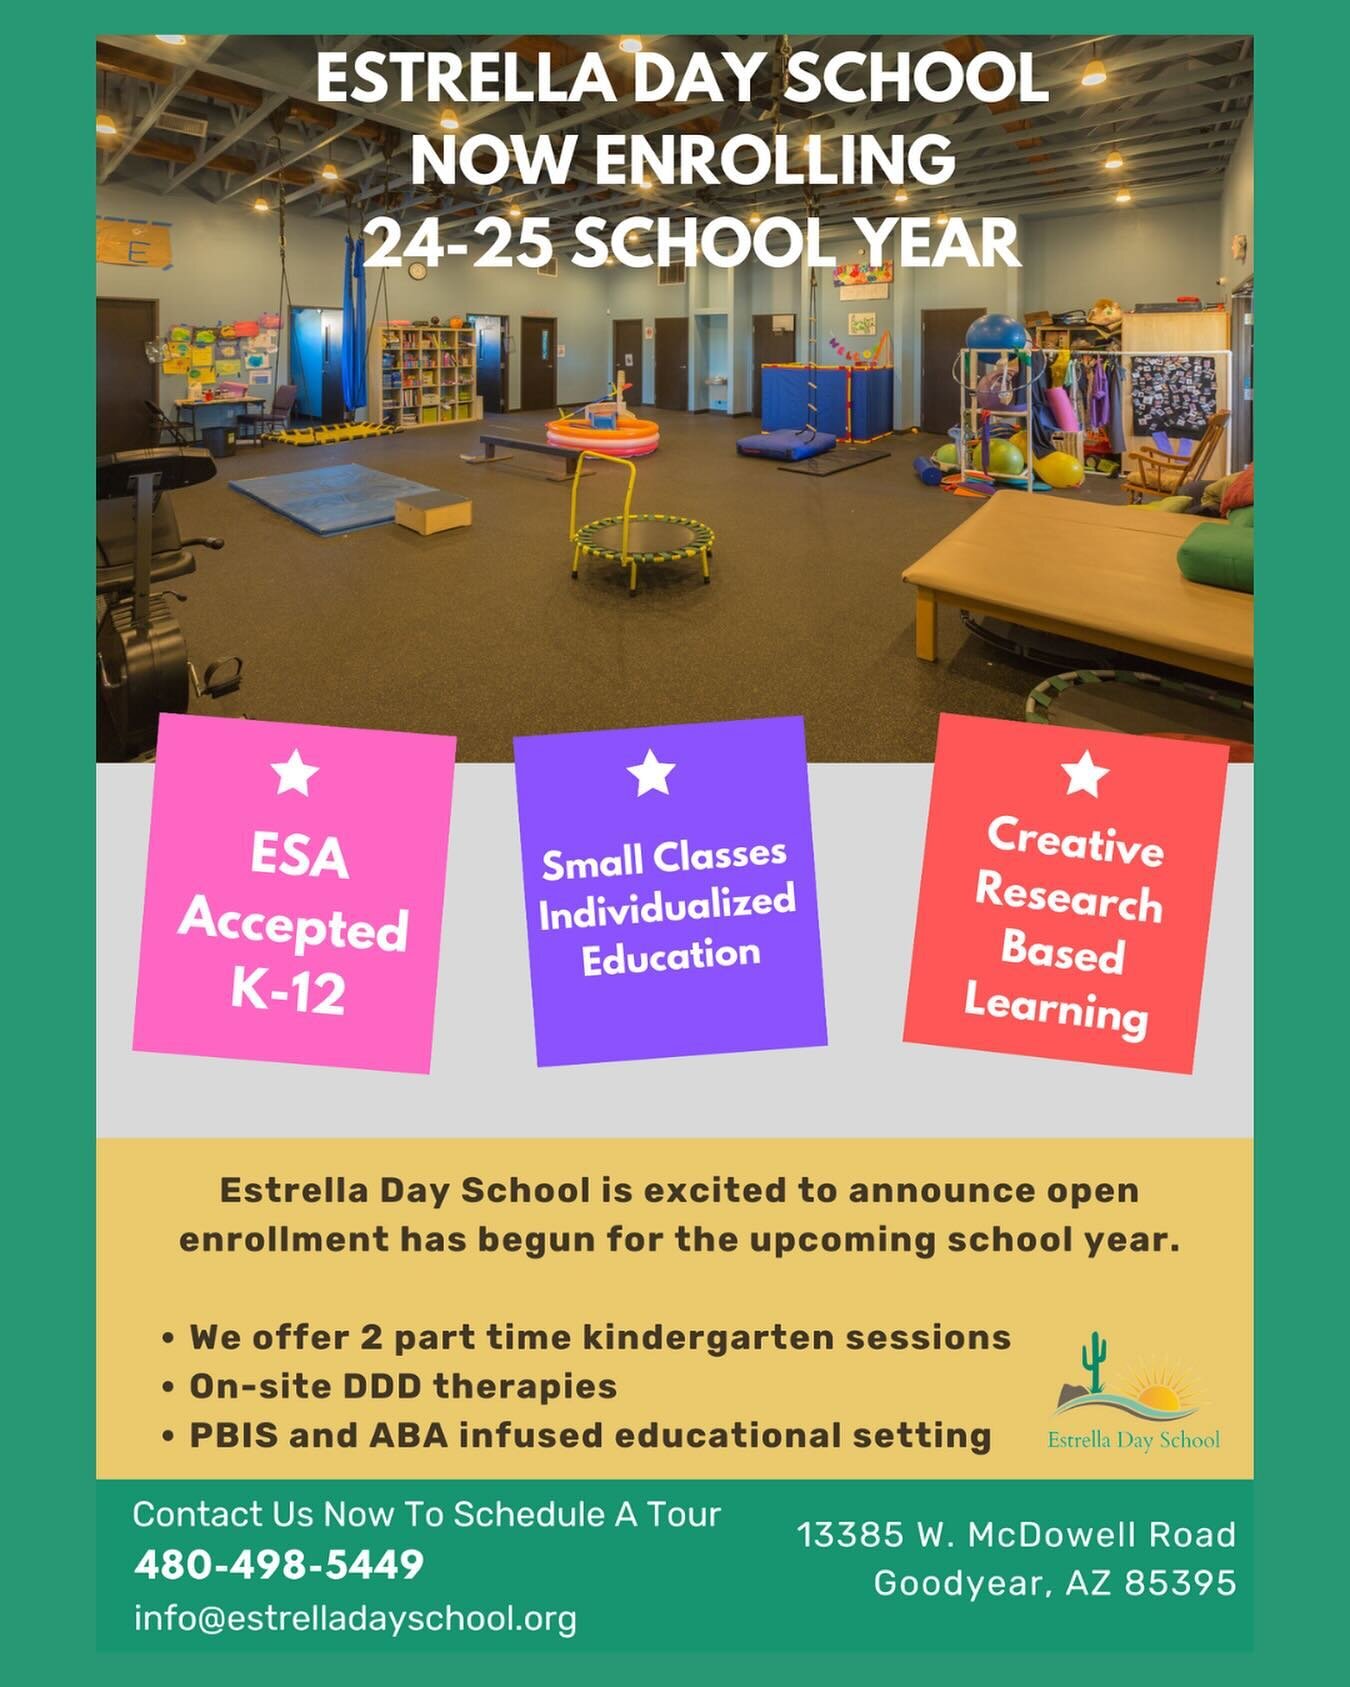 Estrella Day School is now accepting enrollment applications for the 24-35 academic year. Contact us today!